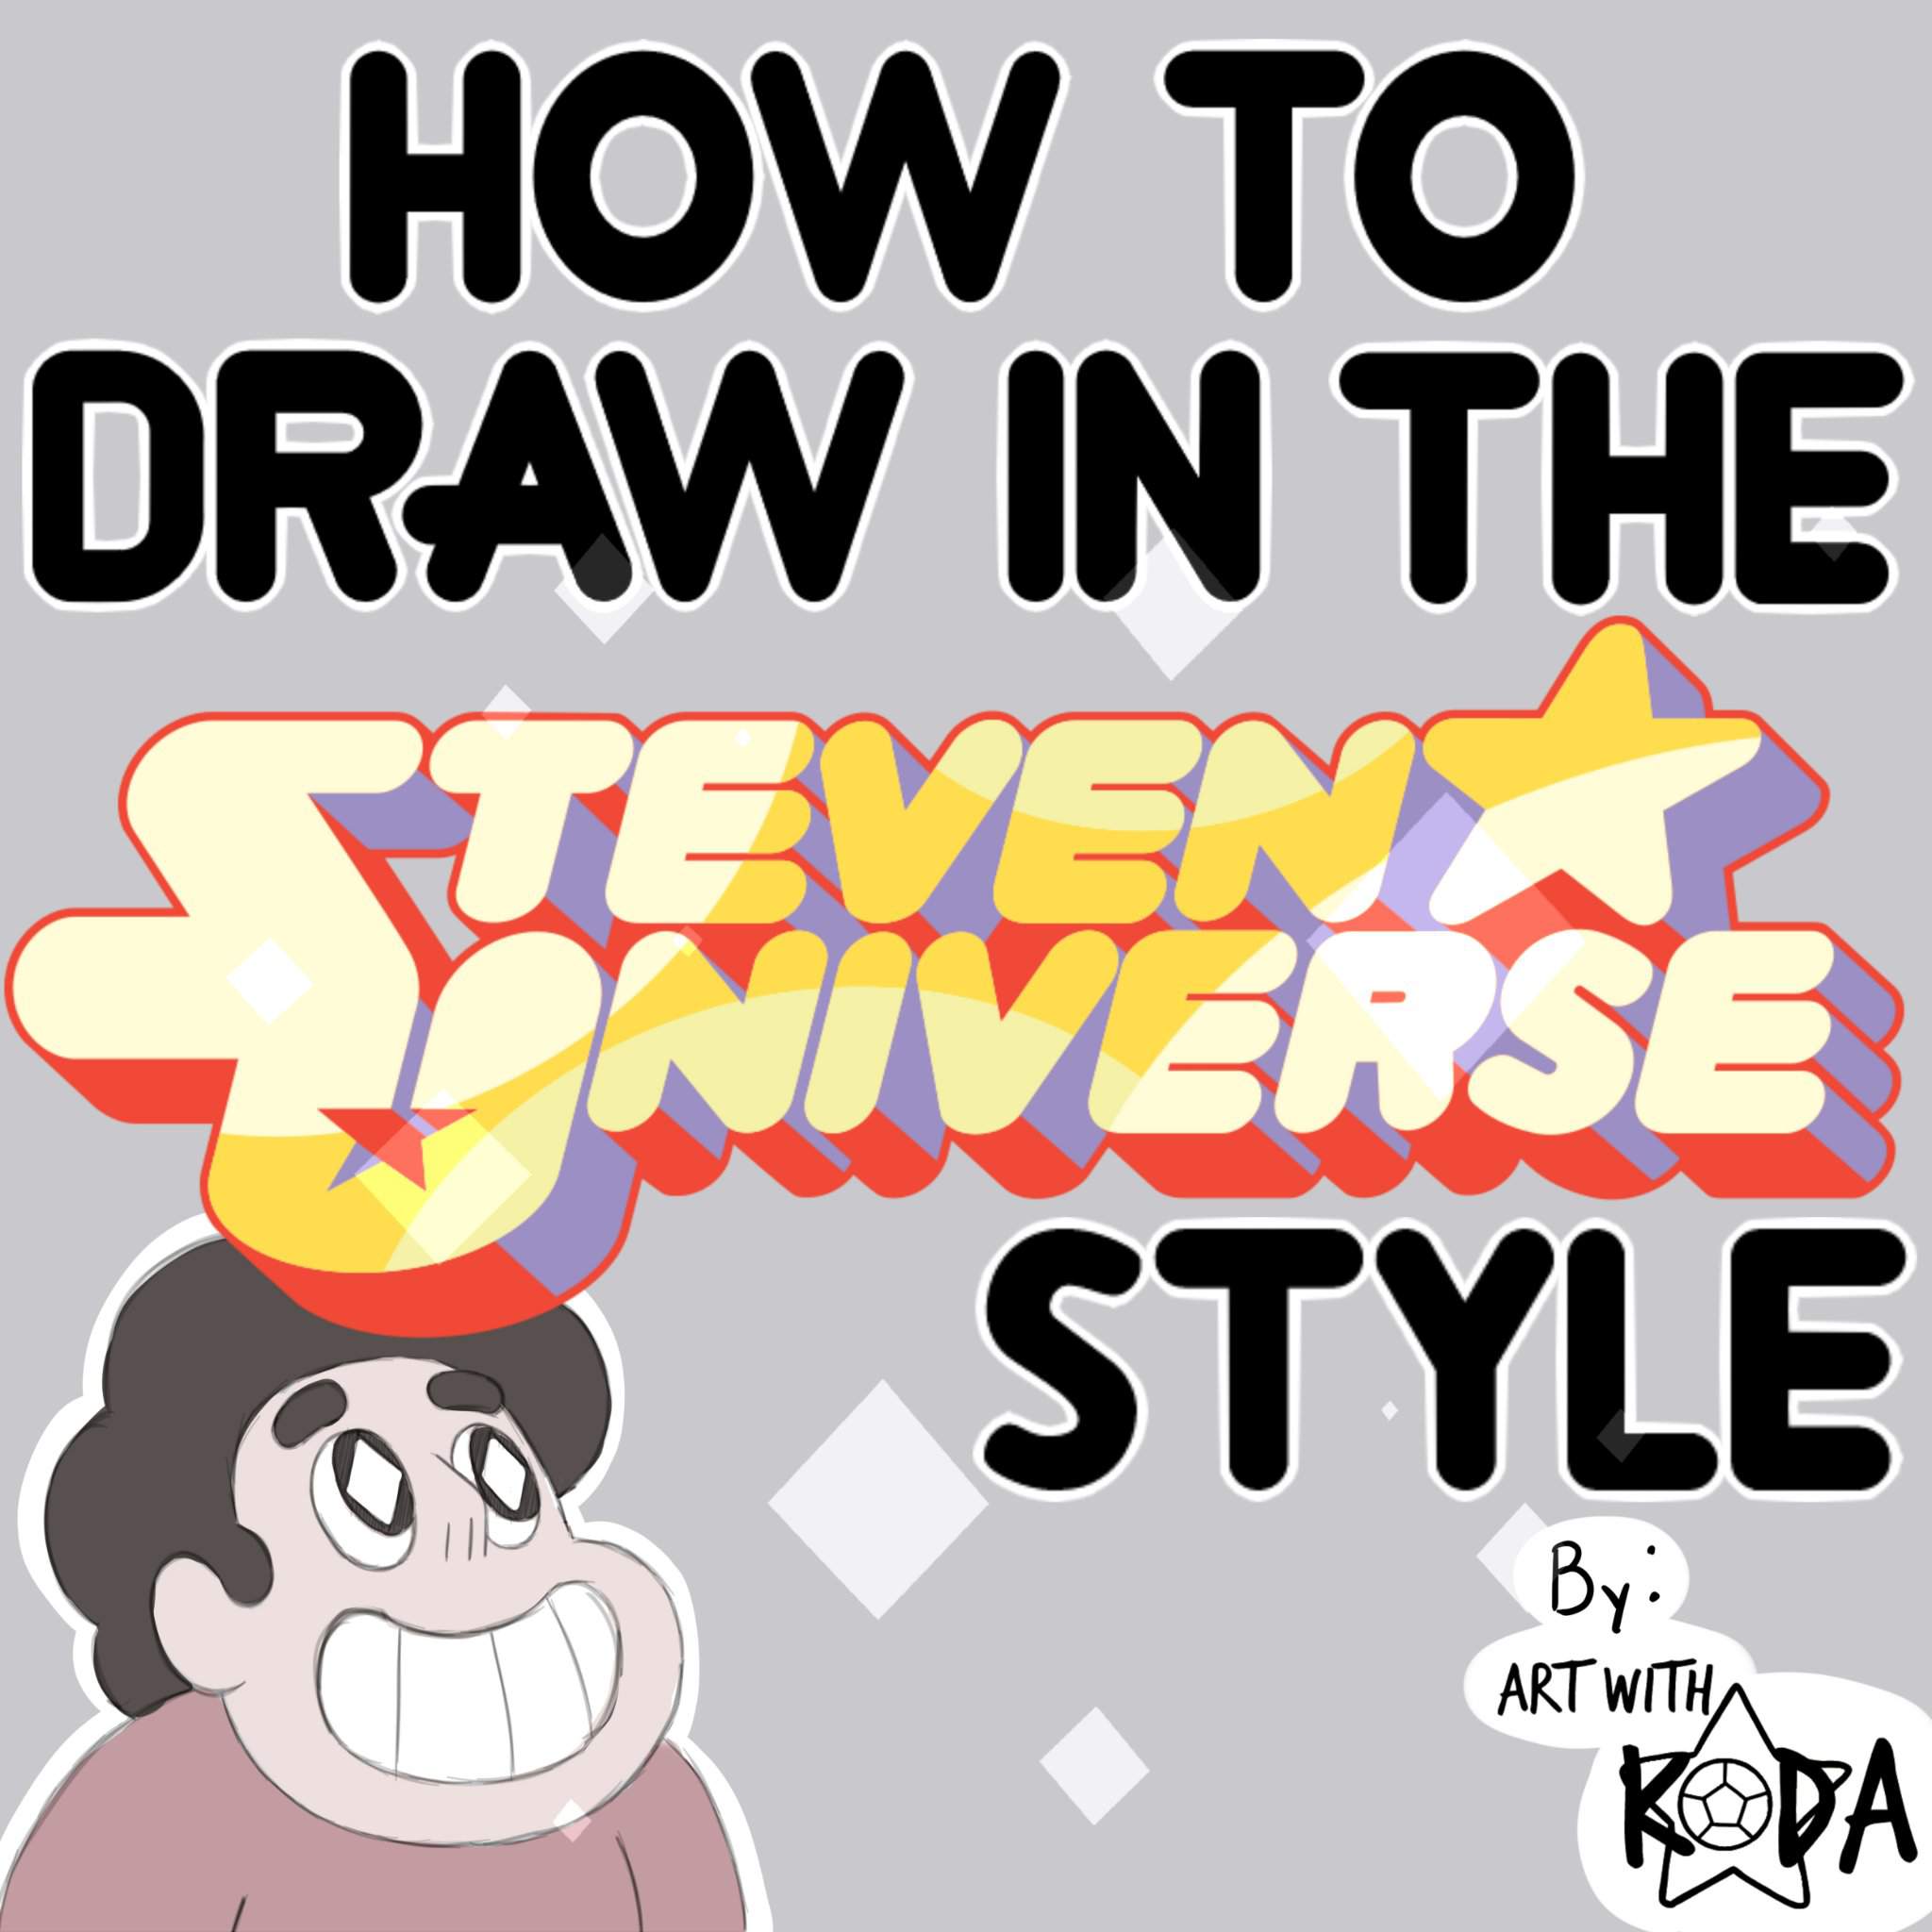 HOW TO DRAW THE "STEVEN UNIVERSE" STYLE Steven Universe Amino